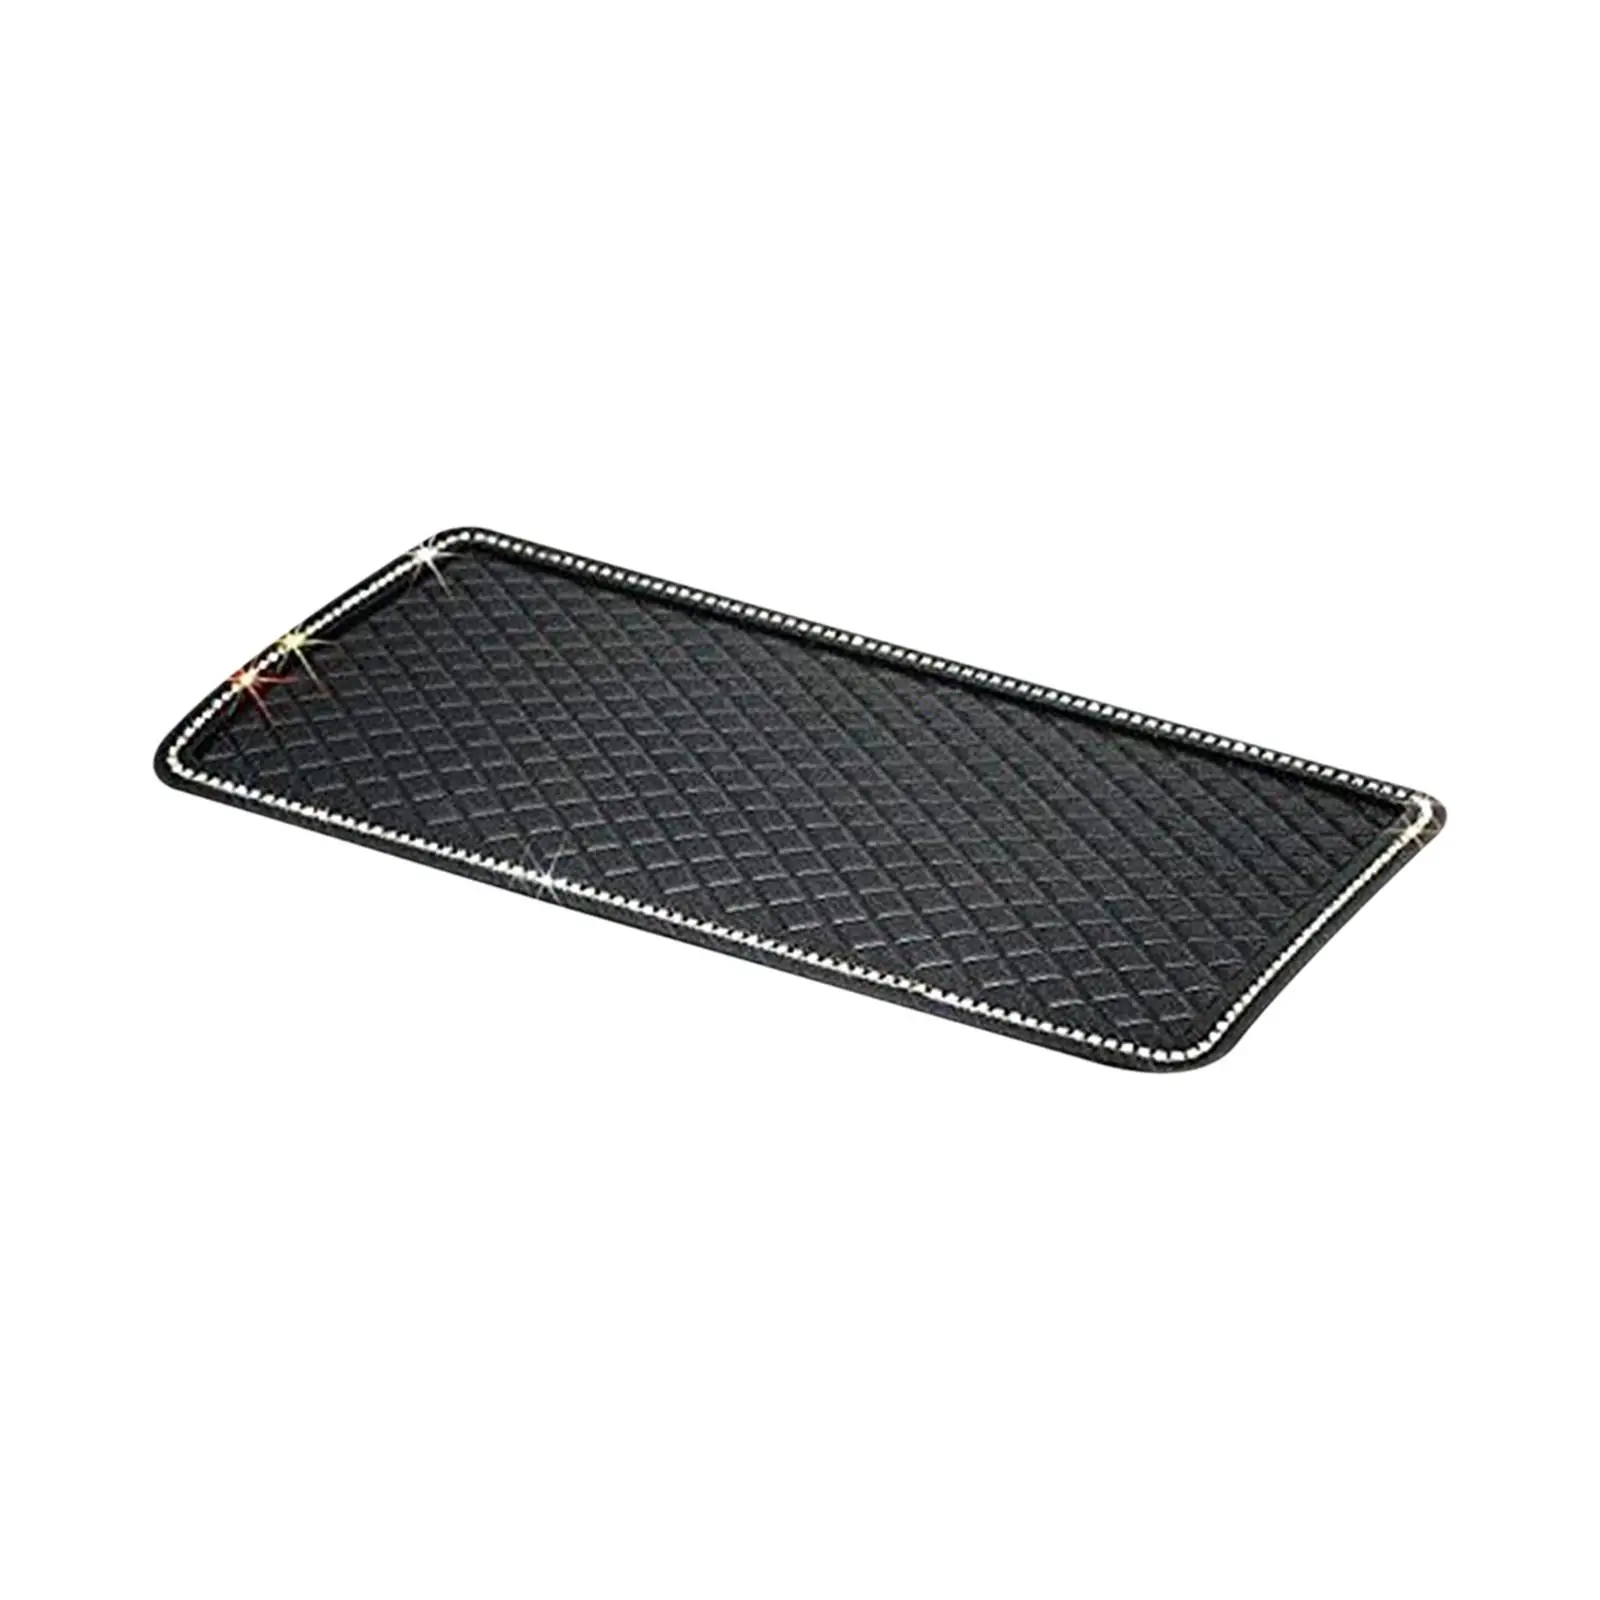 Universal Car Anti Slip Sticky Dashboard Pad Interior Accessories Removable Gripping Pad for Electronic Devices Phones Keys